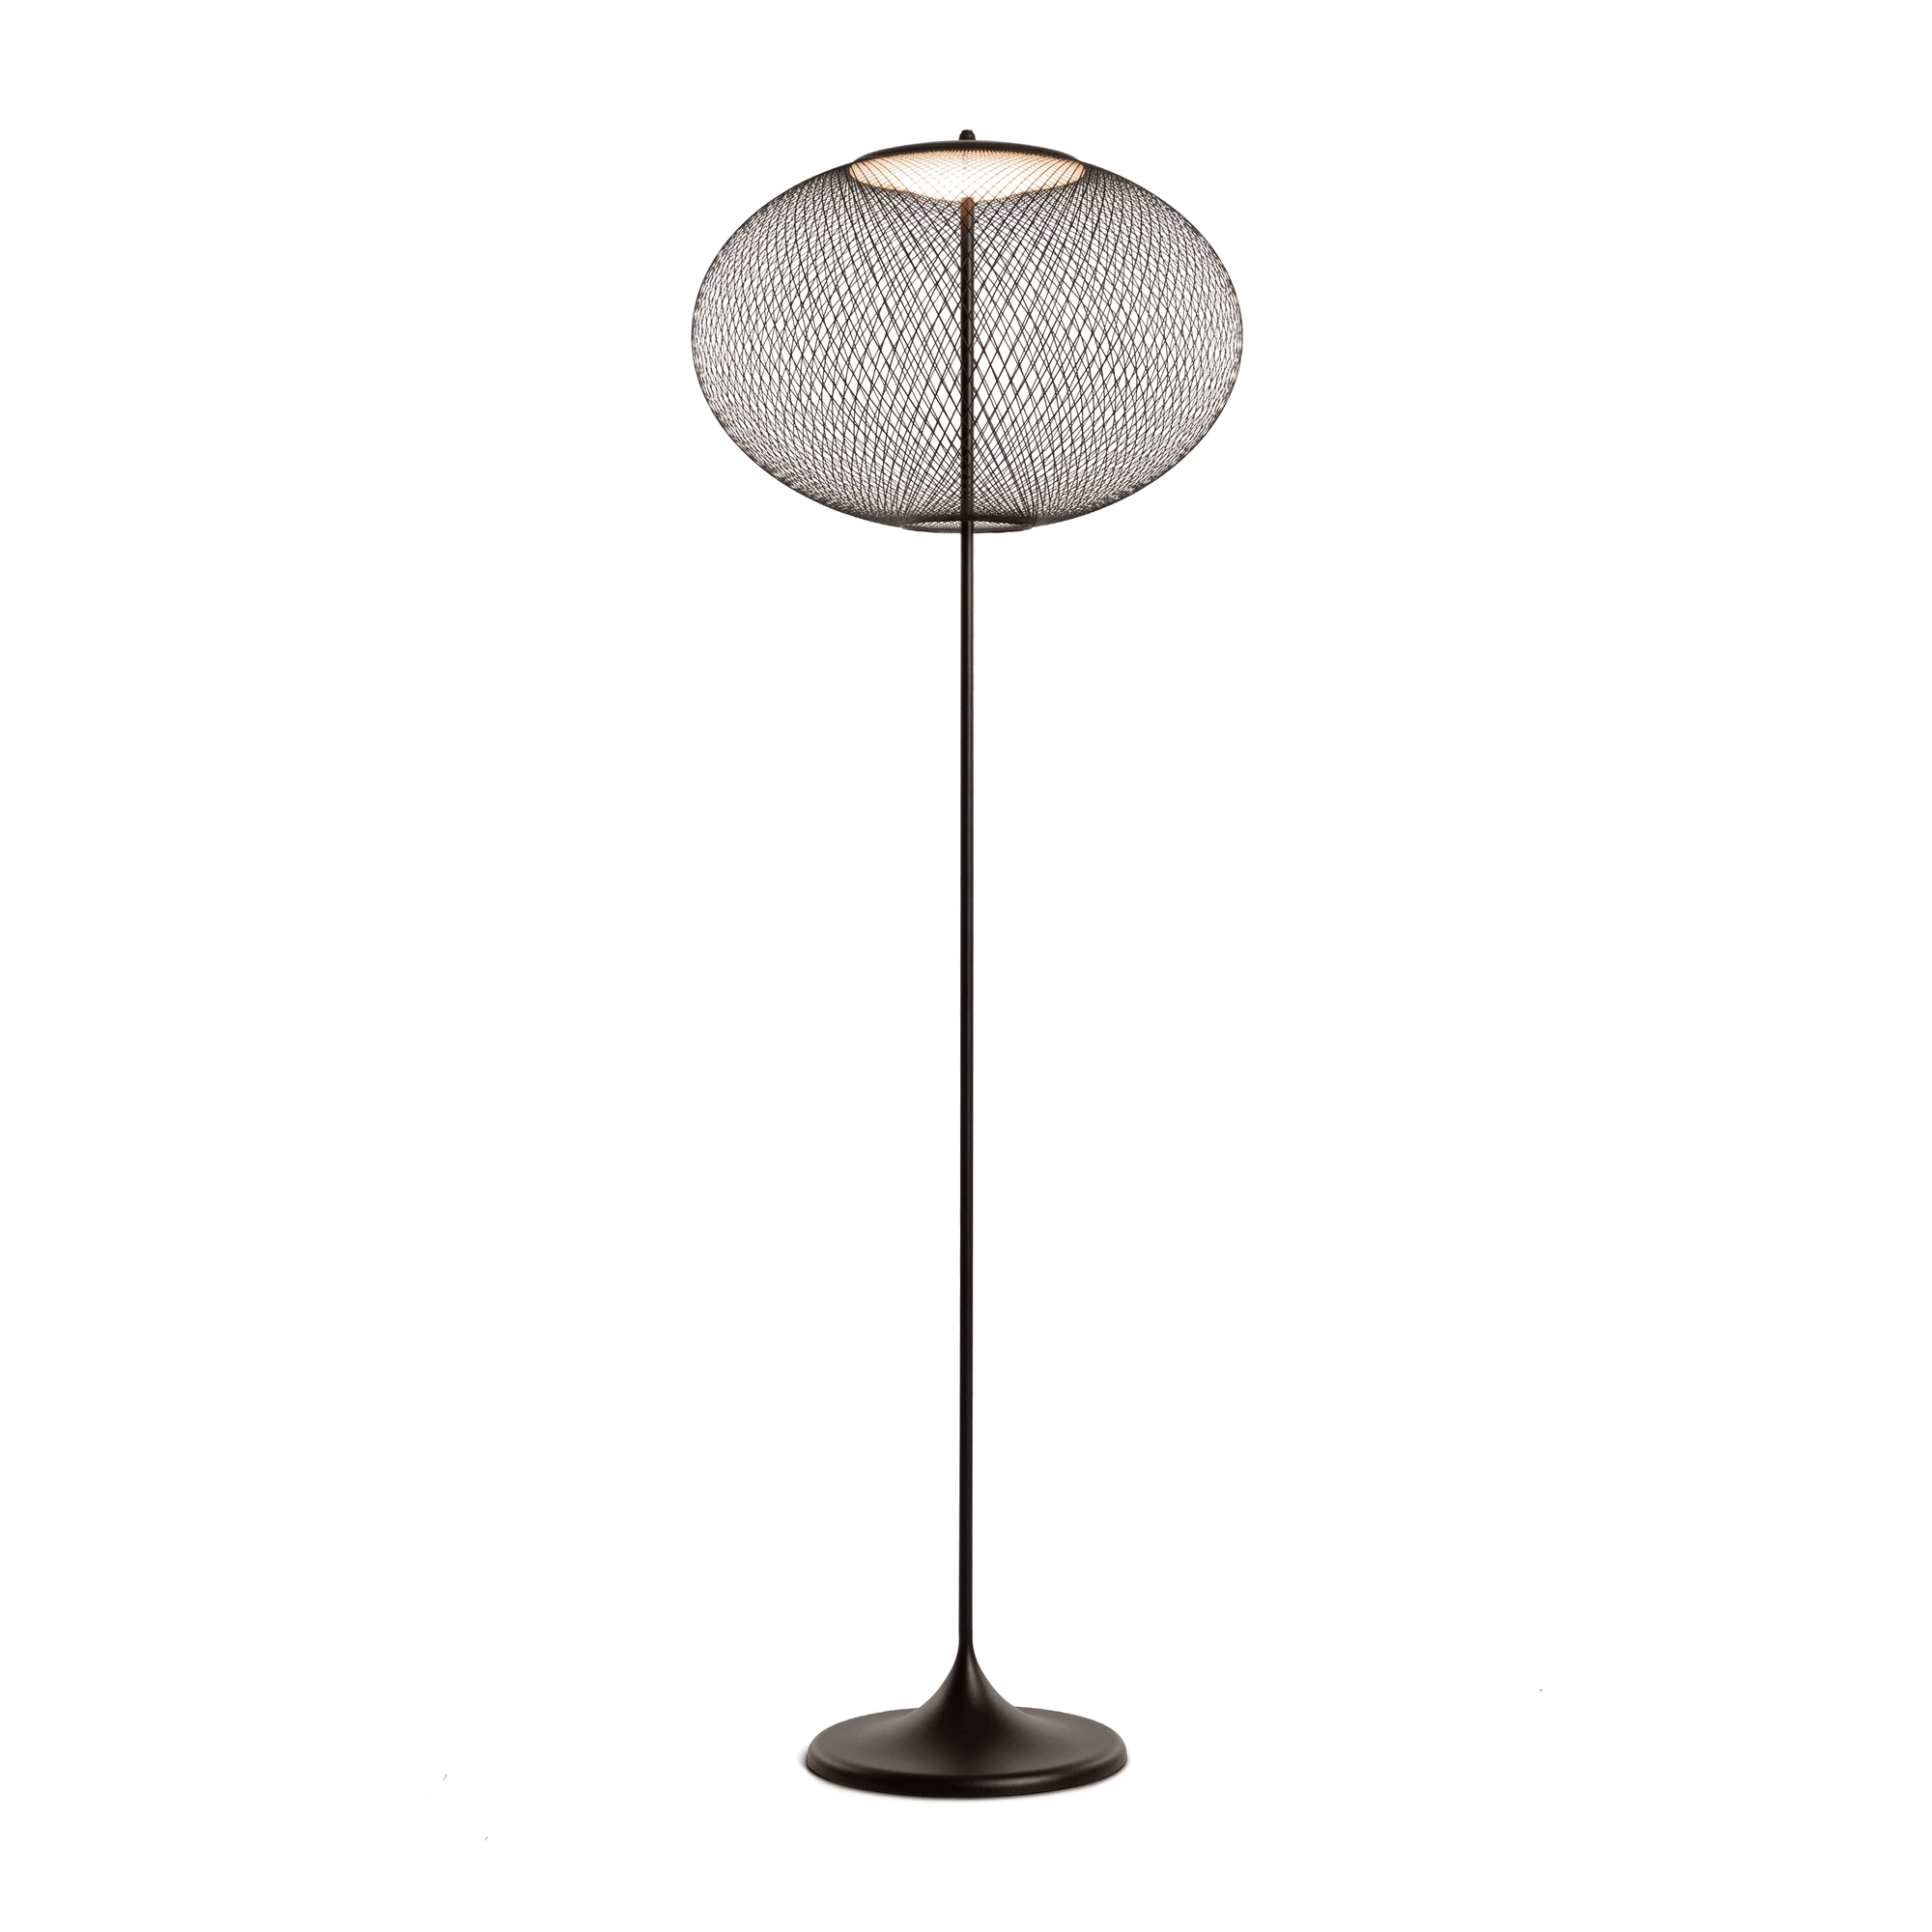 NR2 Floor Lamp - Curated Lighting $1000-$2000, Black, floor, in stock and ready to ship, Moooi, White